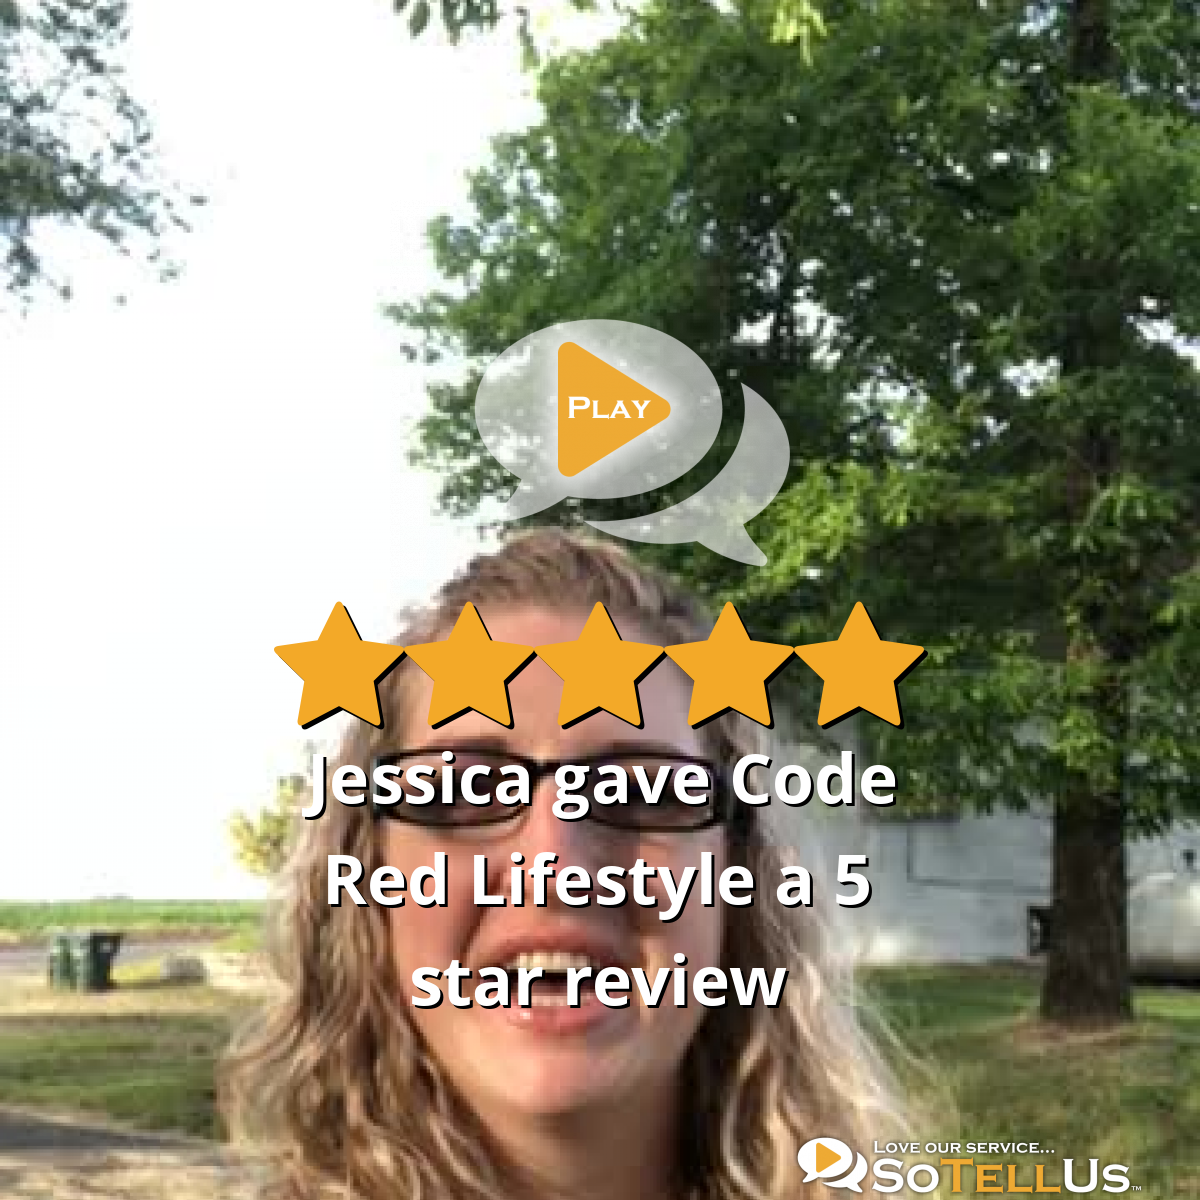 Jessica T gave Code Red Lifestyle a 5 star review on SoTellUs